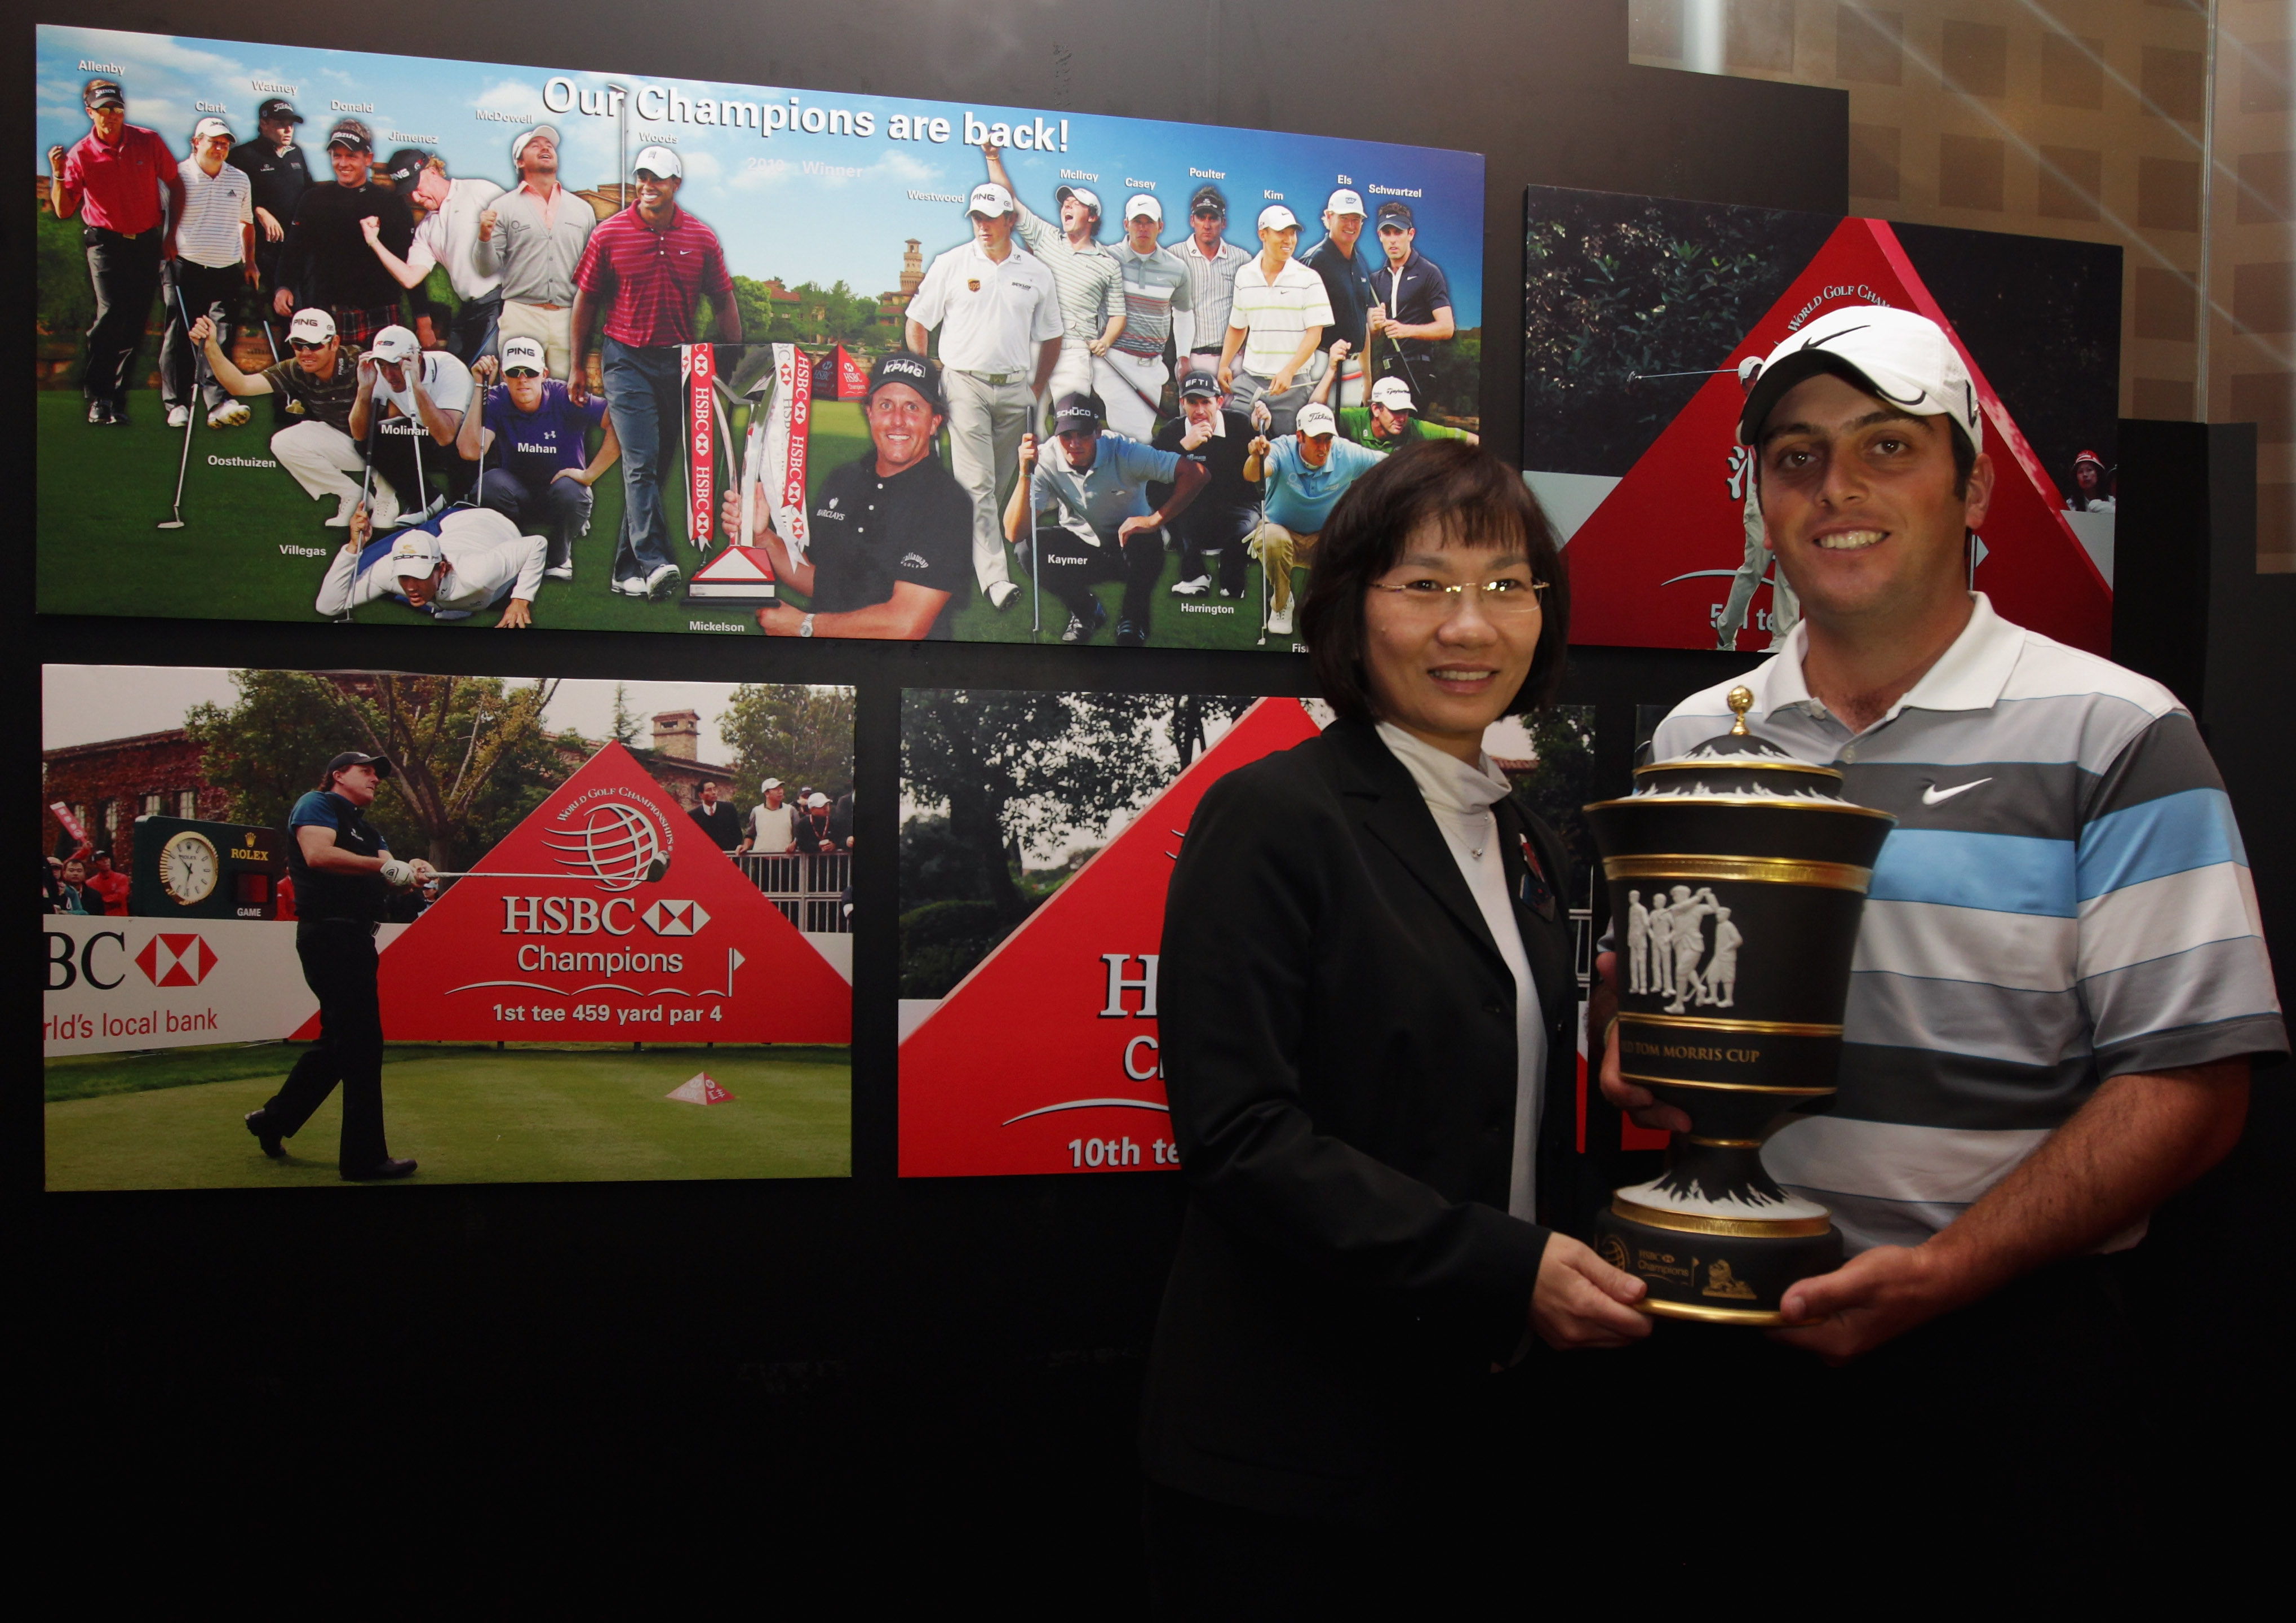 SHANGHAI, CHINA - NOVEMBER 07:  Francesco Molinari of Italy poses with the trophy alongside Helen Wong, CEO of HSBC China, after winning the WGC- HSBC Champions at Sheshan International Golf Club on November 7, 2010 in Shanghai, China.  (Photo by Andrew R